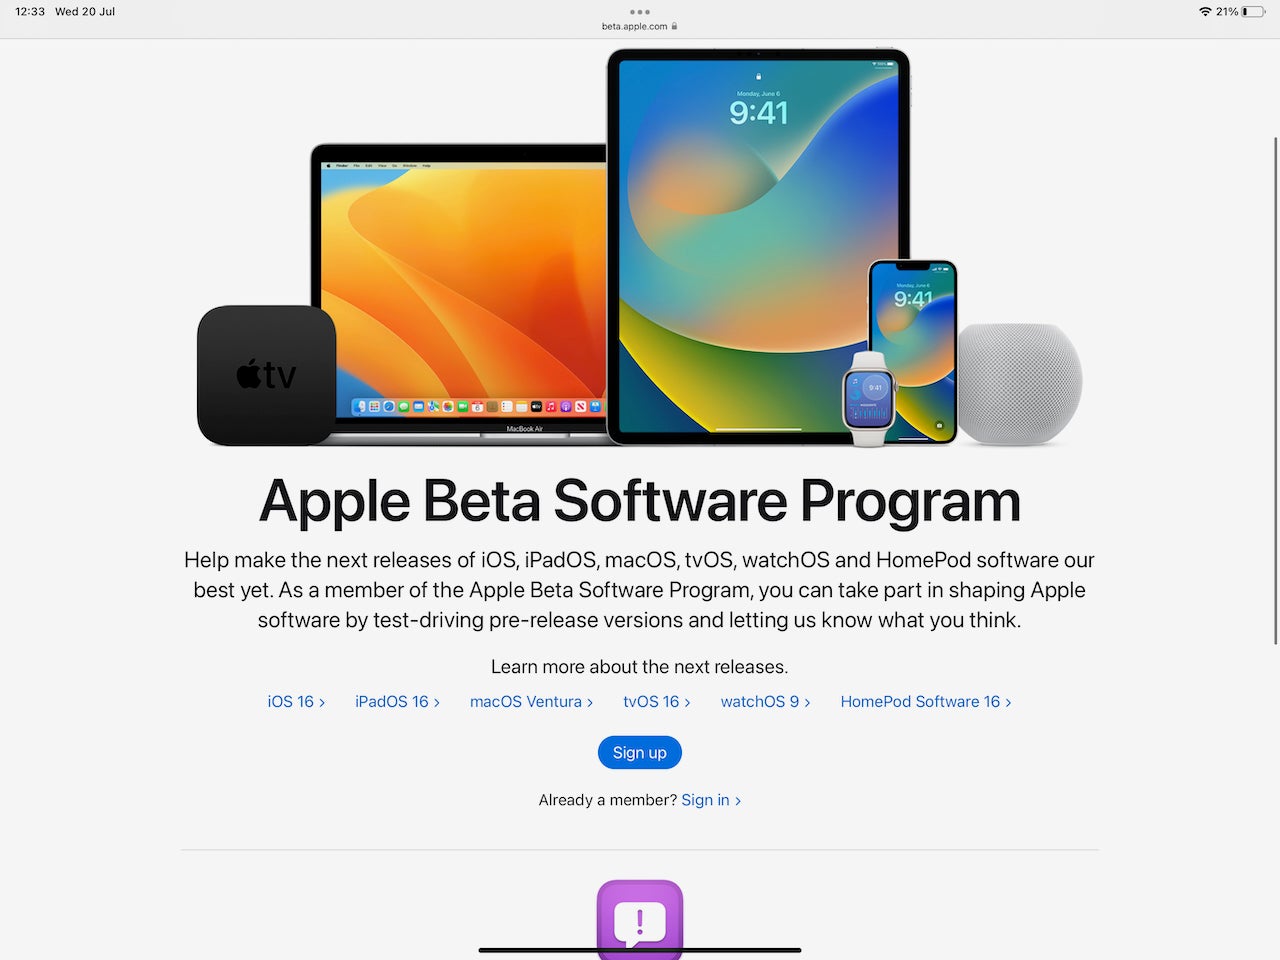 On your iPad, head over to Apple's Beta Site